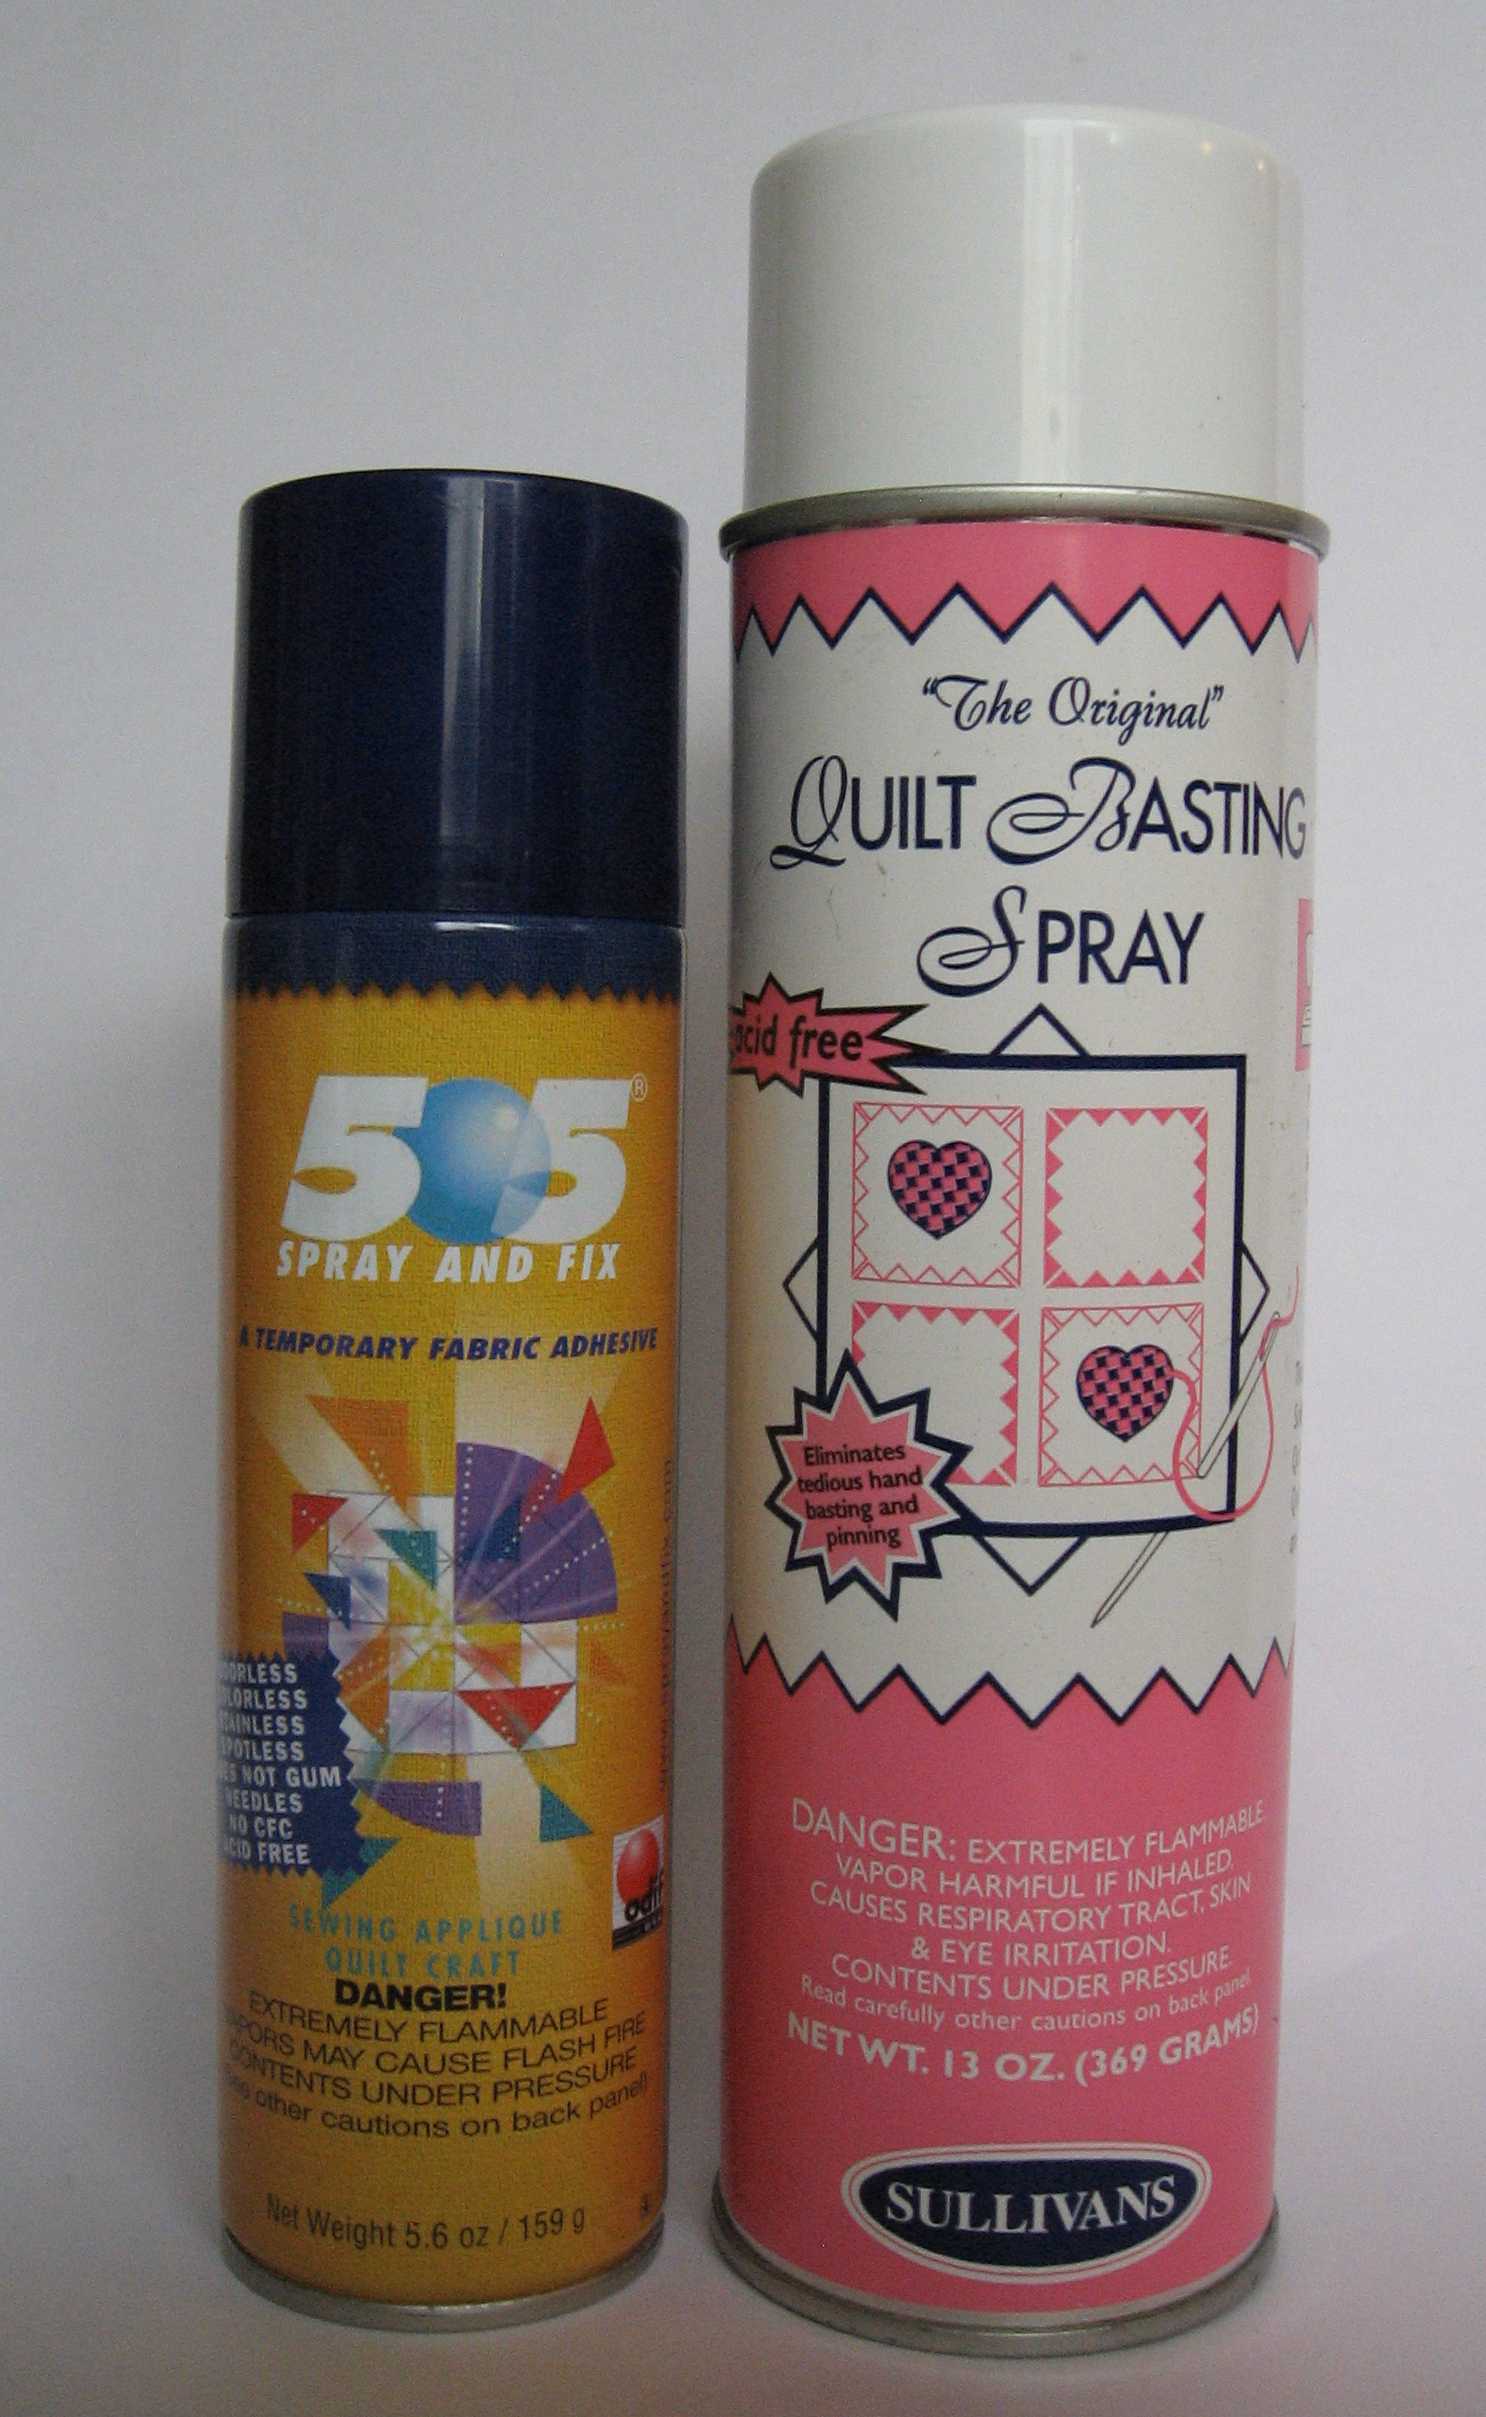 How Long Does Quilt Basting Spray Last?